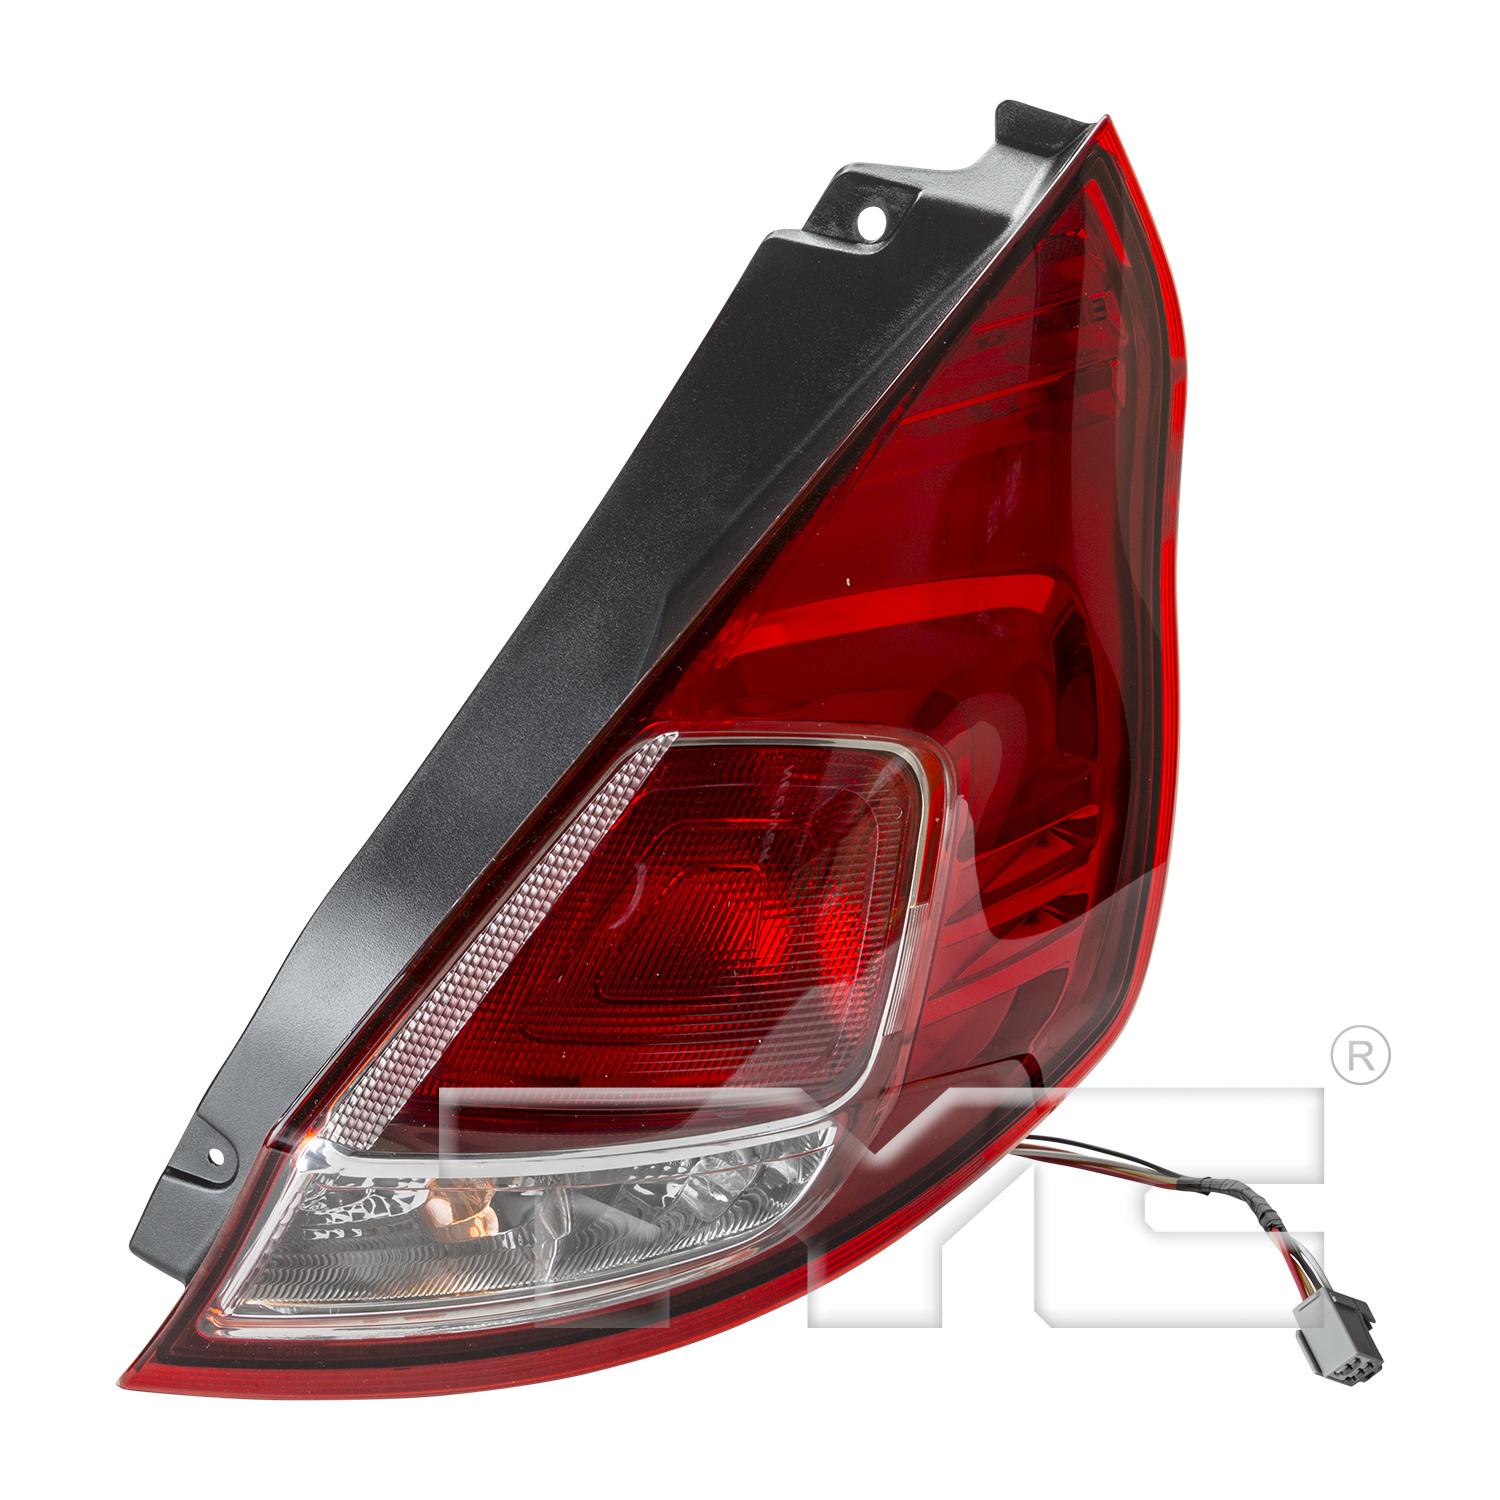 Aftermarket TAILLIGHTS for FORD - FIESTA, FIESTA,14-18,RT Taillamp assy